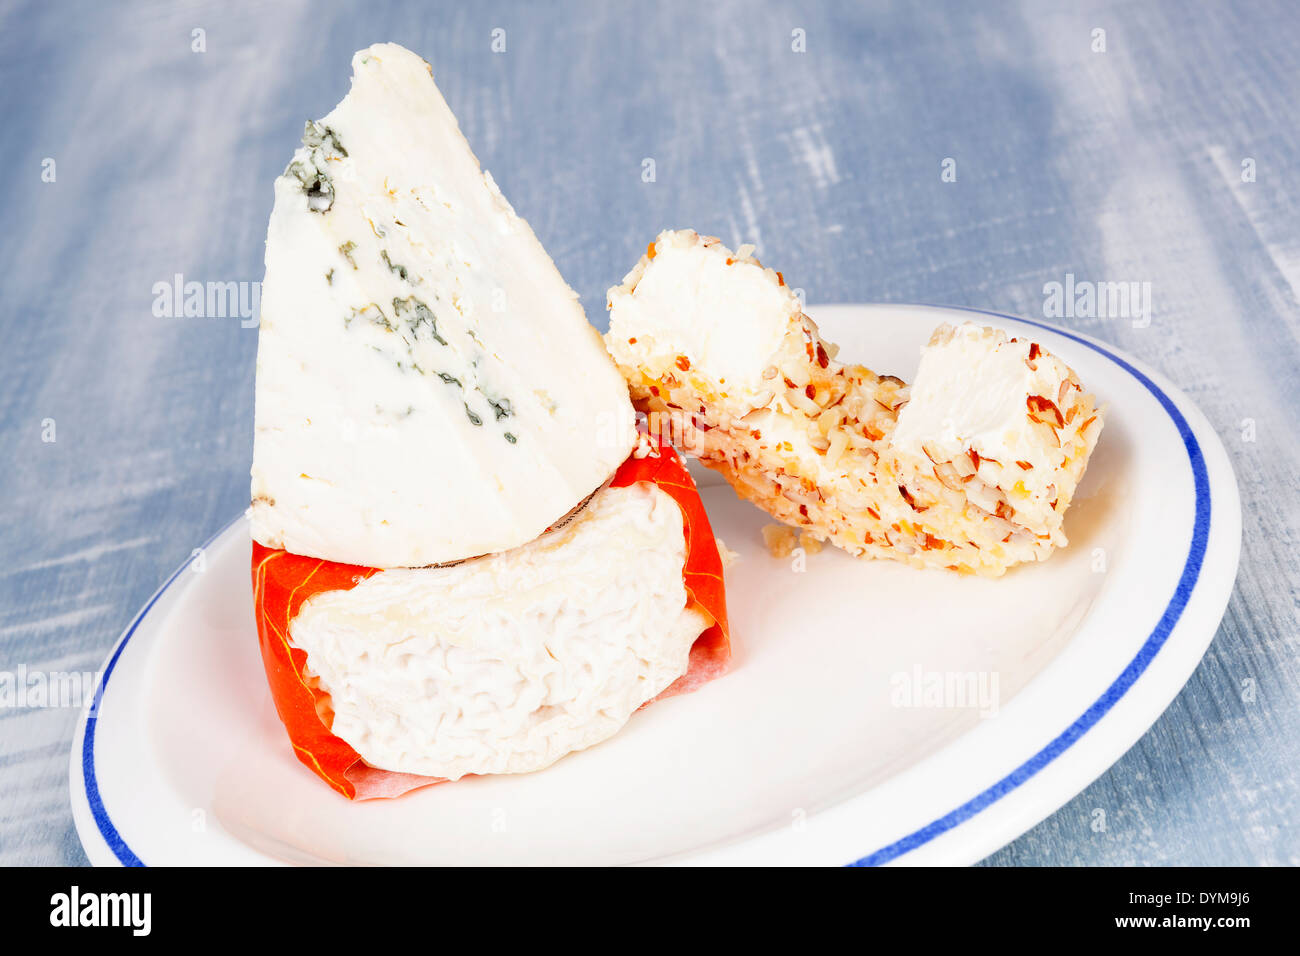 Luxurious colorful cheese assortment. Blue cheese, cream cheese and goat cheese on plate on blue wooden background. Culinary Stock Photo